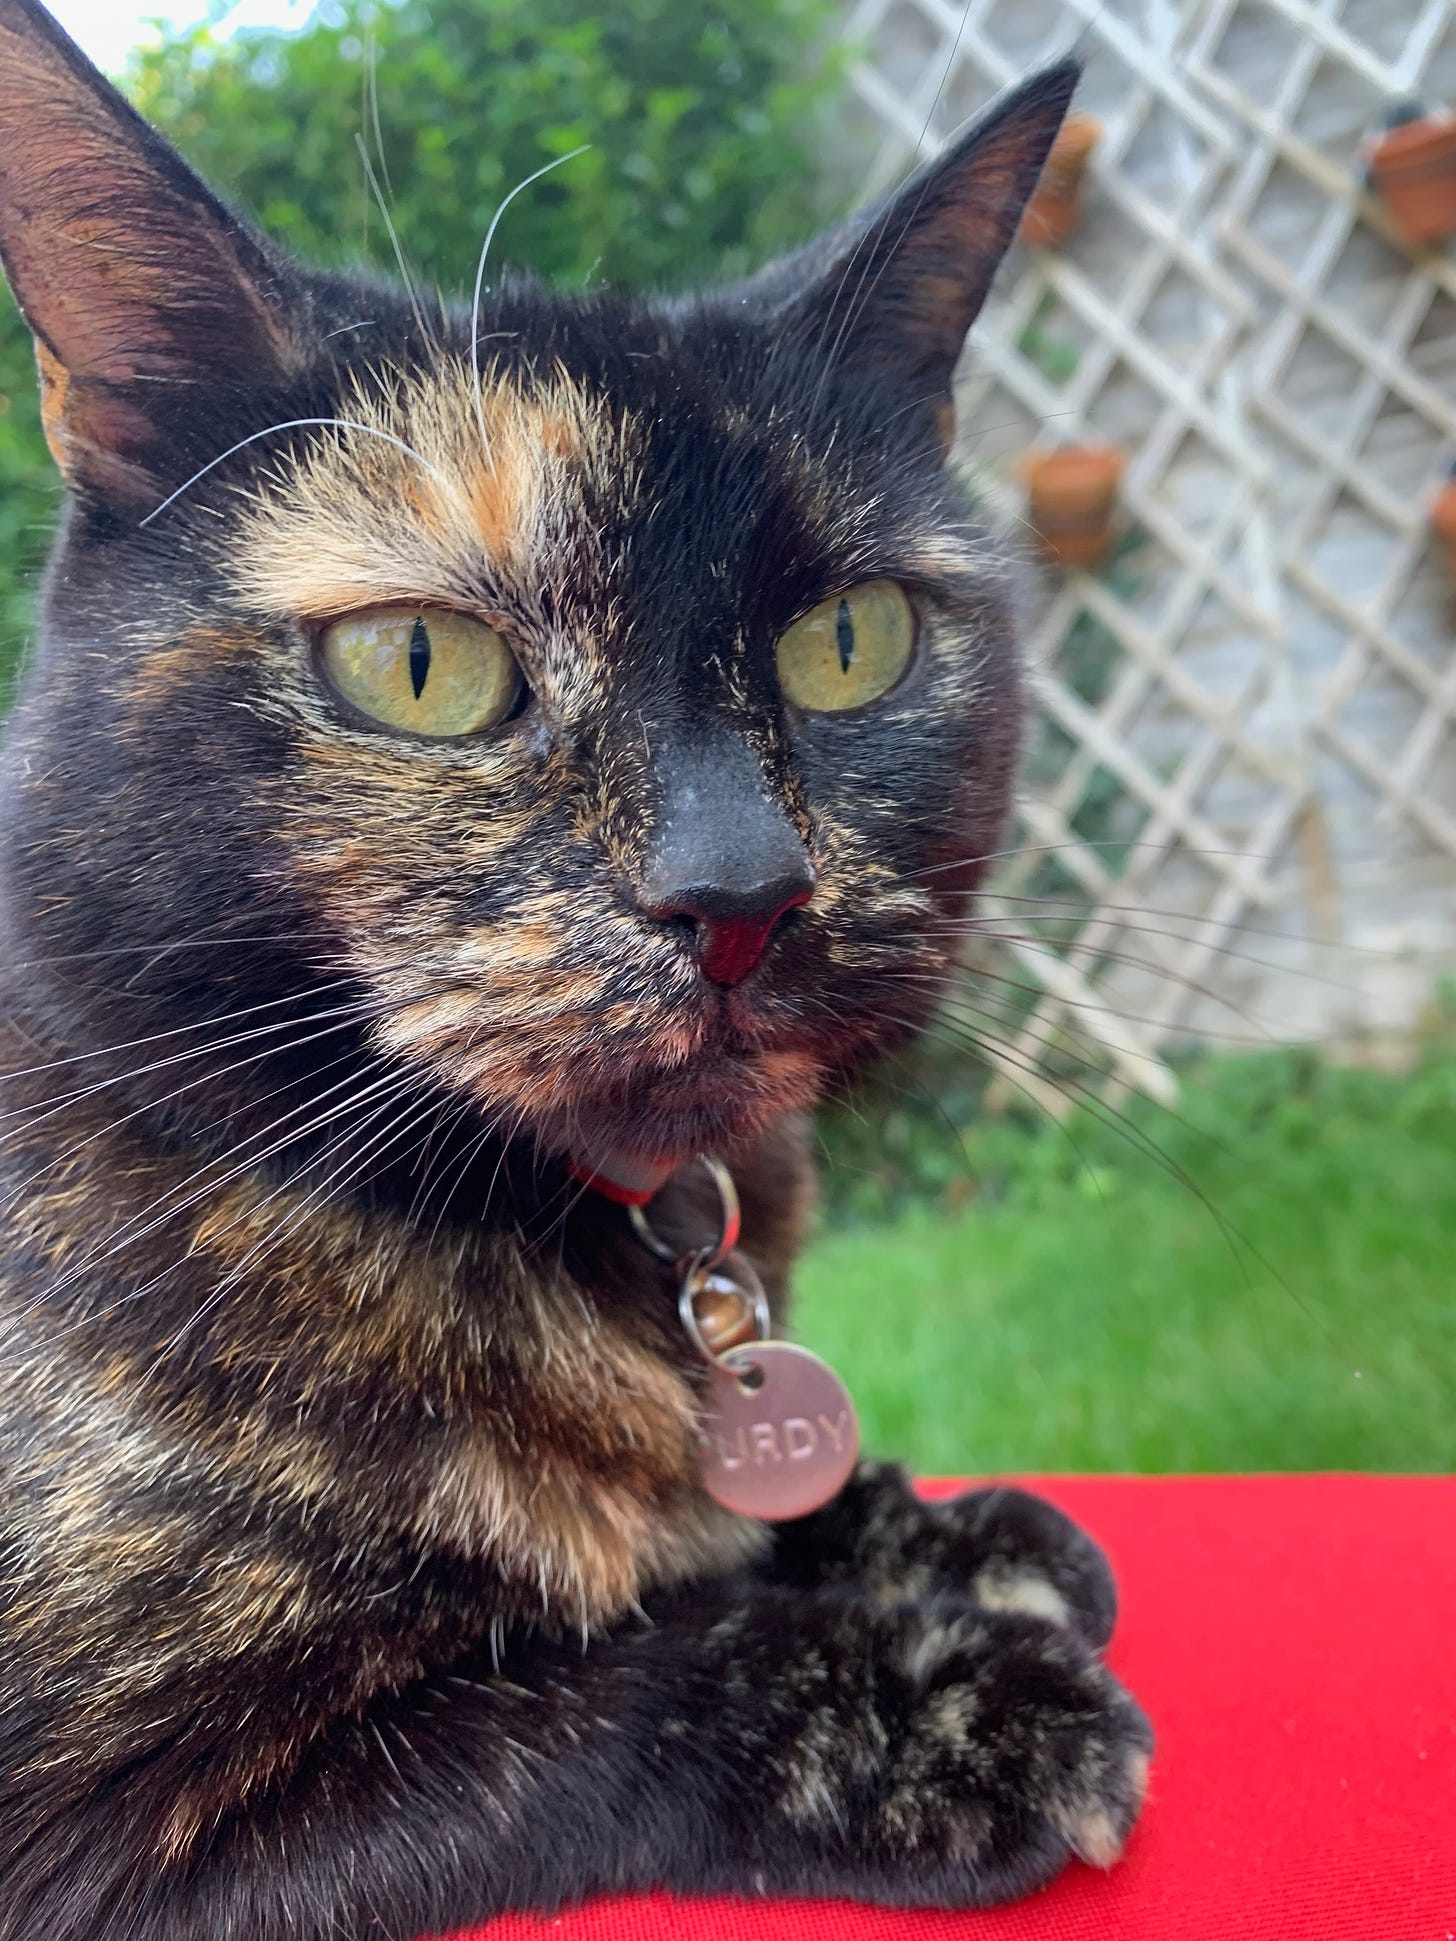 Purdy, tortoiseshell cat, sat on a cushion outside posing for the camera.